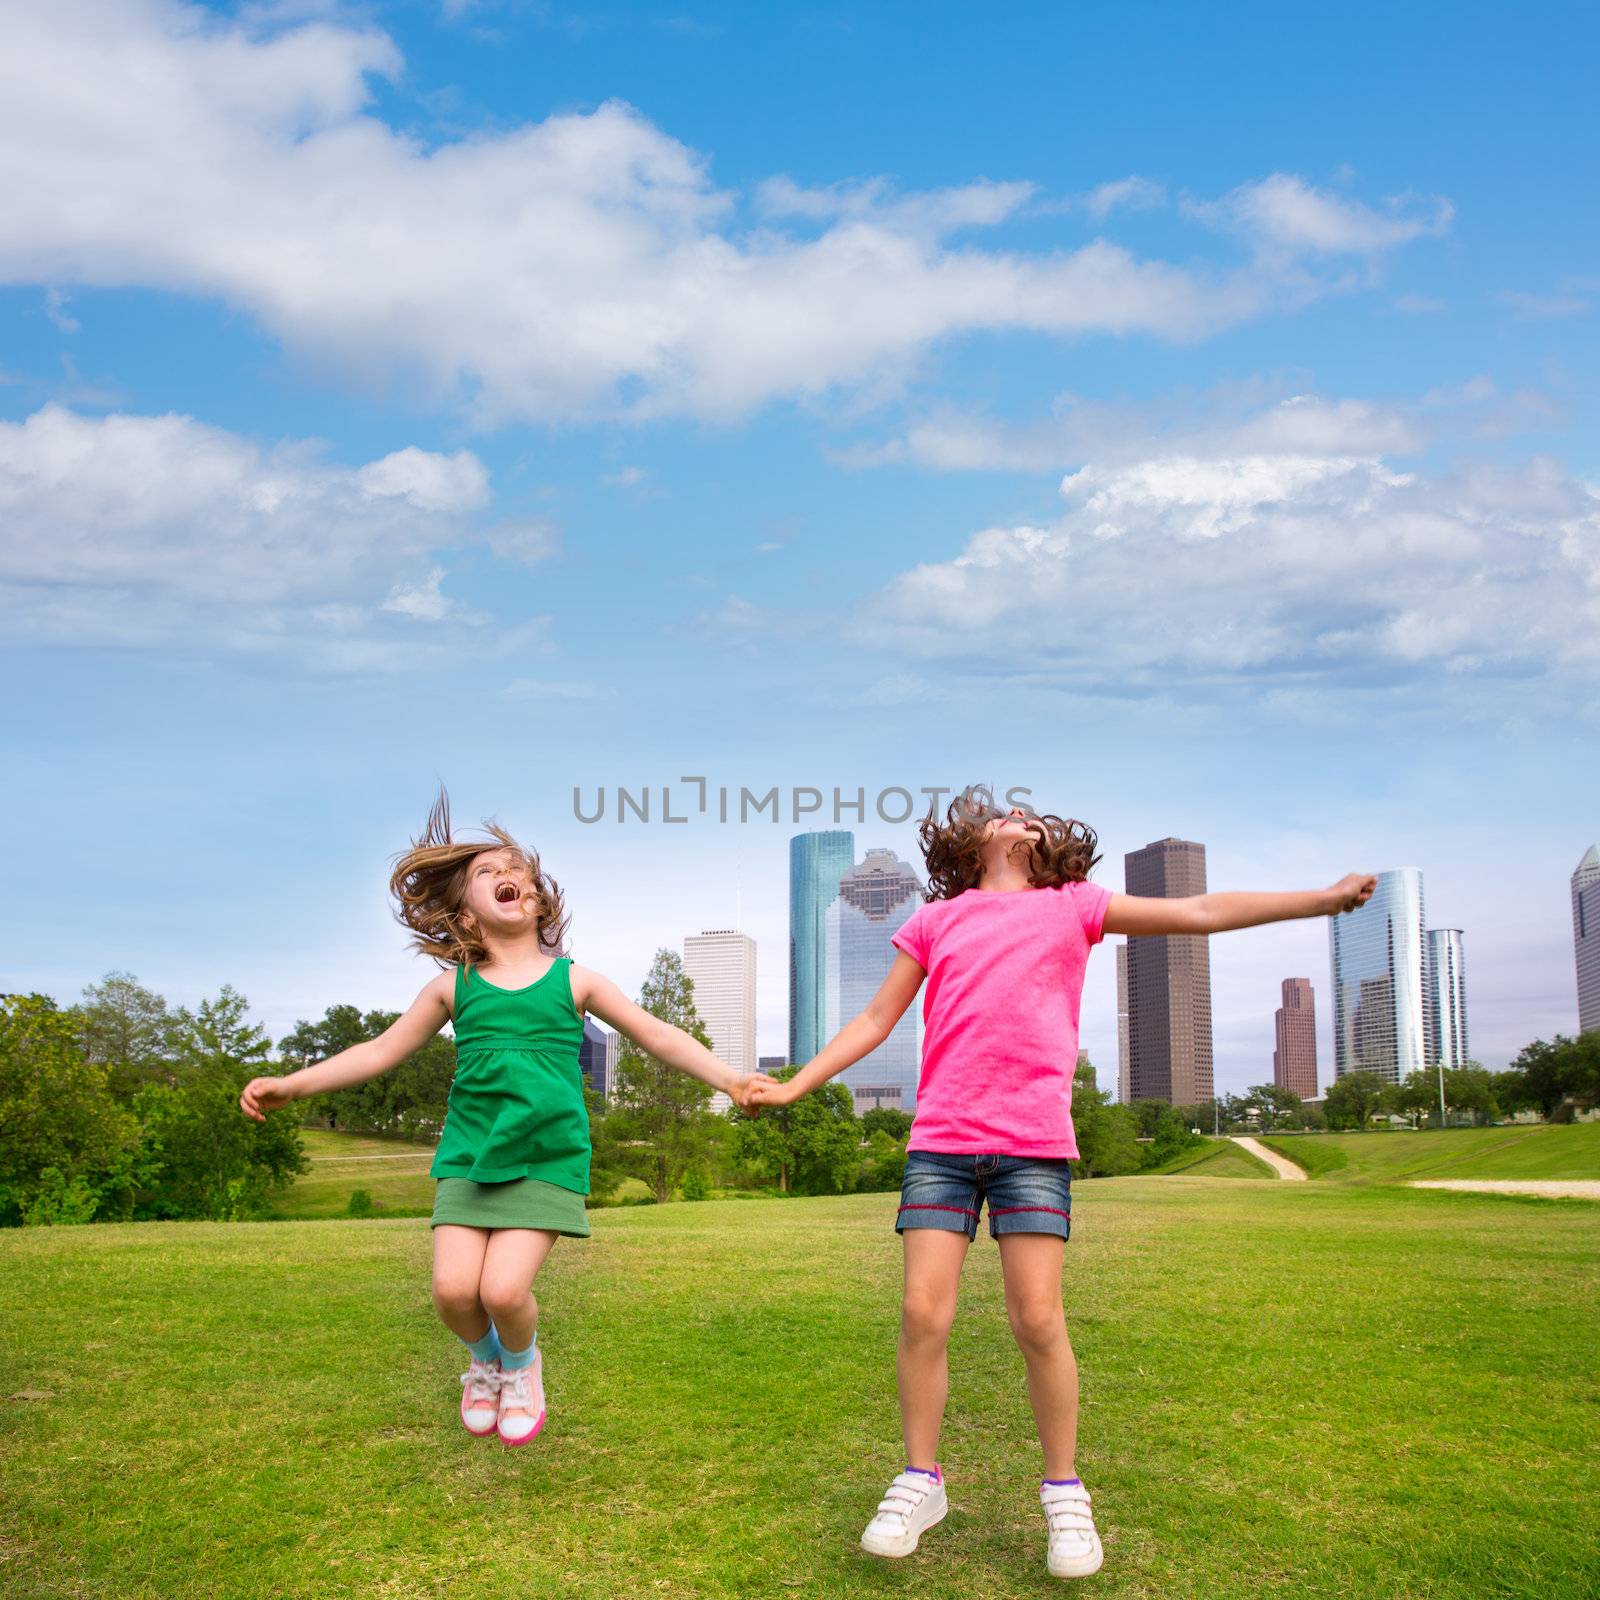 Two sister girls friends jumping happy holding hand in urban modern skyline on park lawn